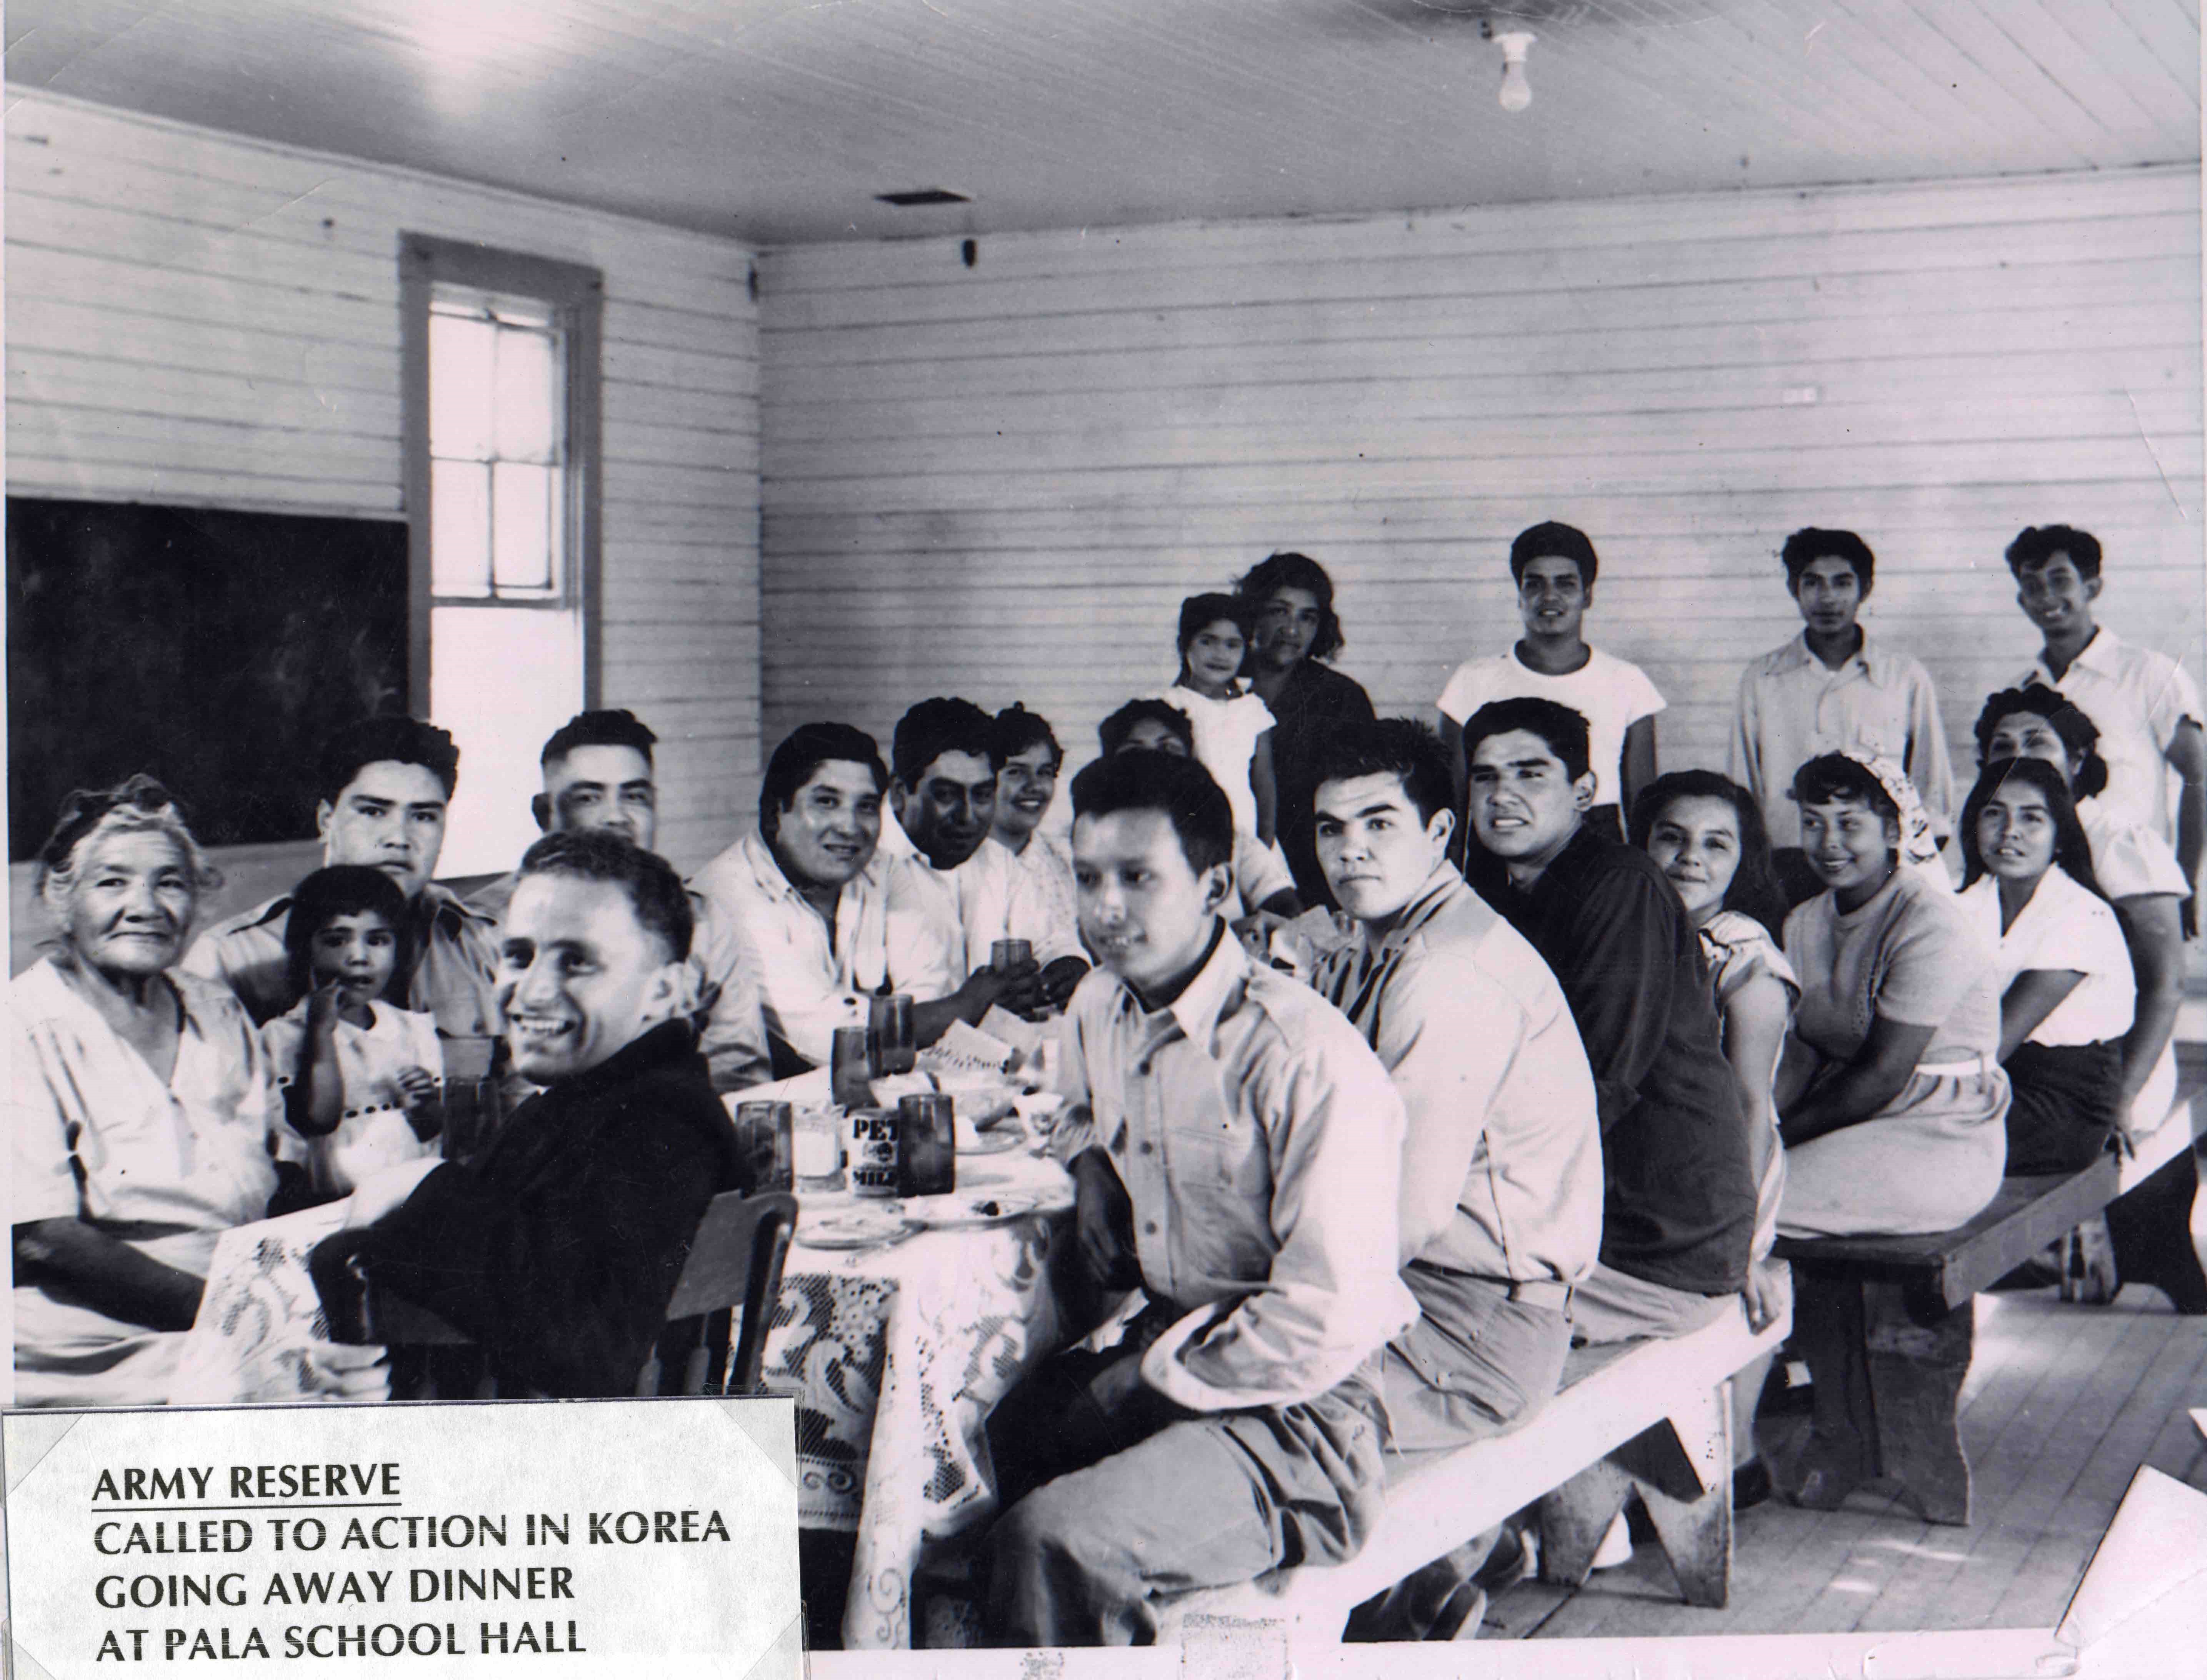 Black-and-white photograph of young men in U.S. Army uniforms with elders, children and other relatives sitting down to eat at long tables in a dining hall; printed text that reads: “ARMY RESERVE: CALLED TO ACTION IN KOREA: GOING AWAY DINNER AT PALA SCHOOL HALL”